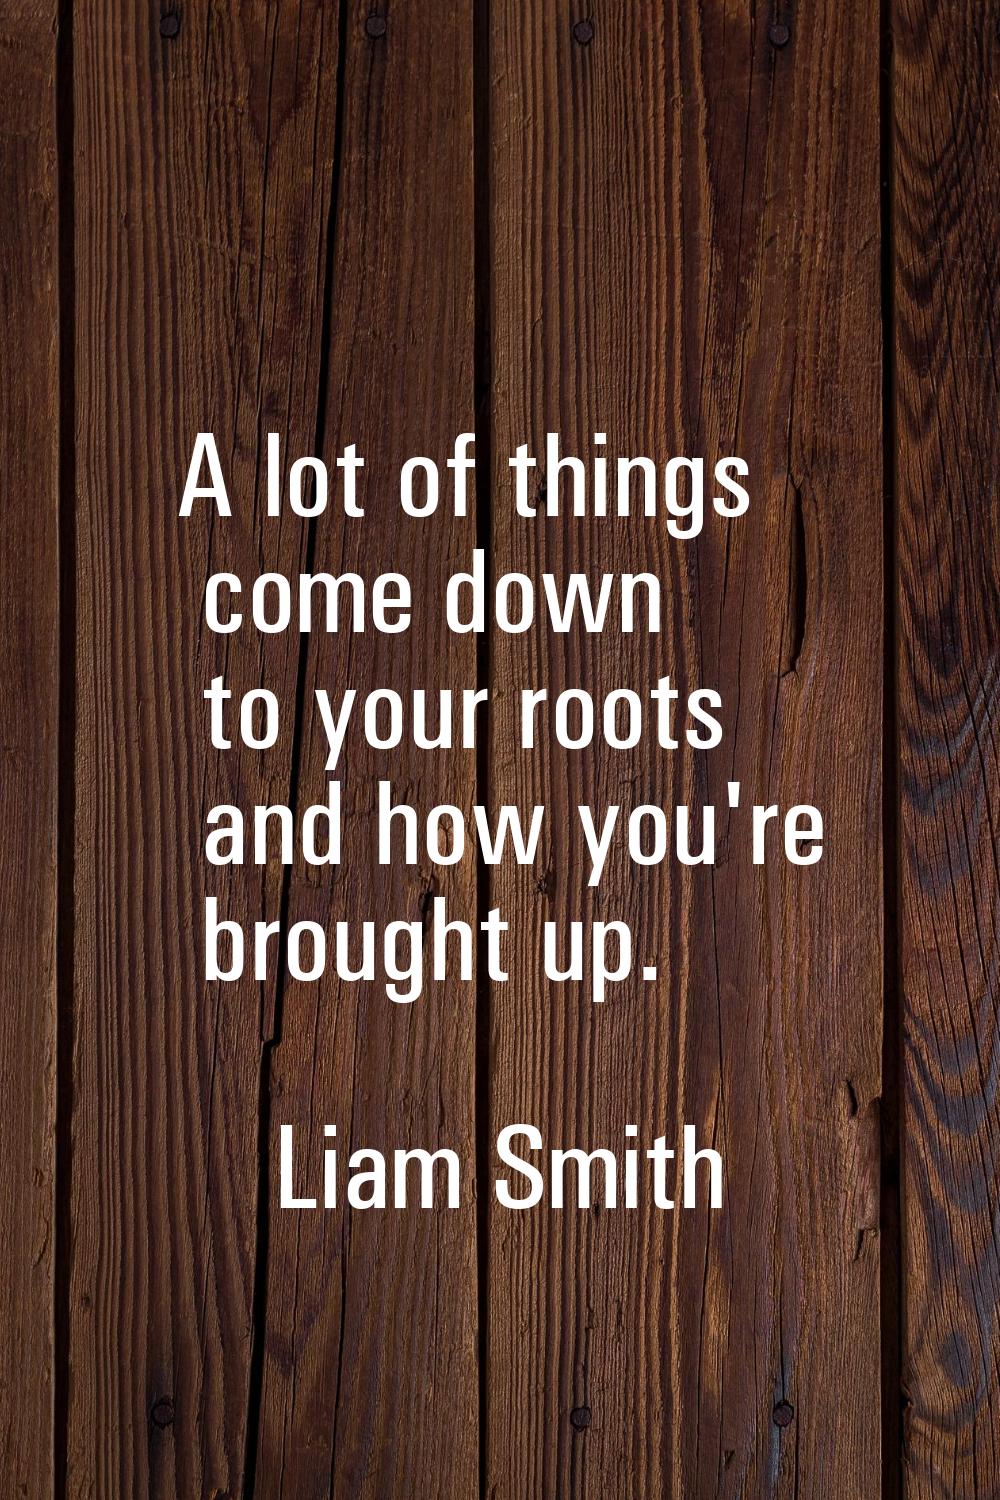 A lot of things come down to your roots and how you're brought up.